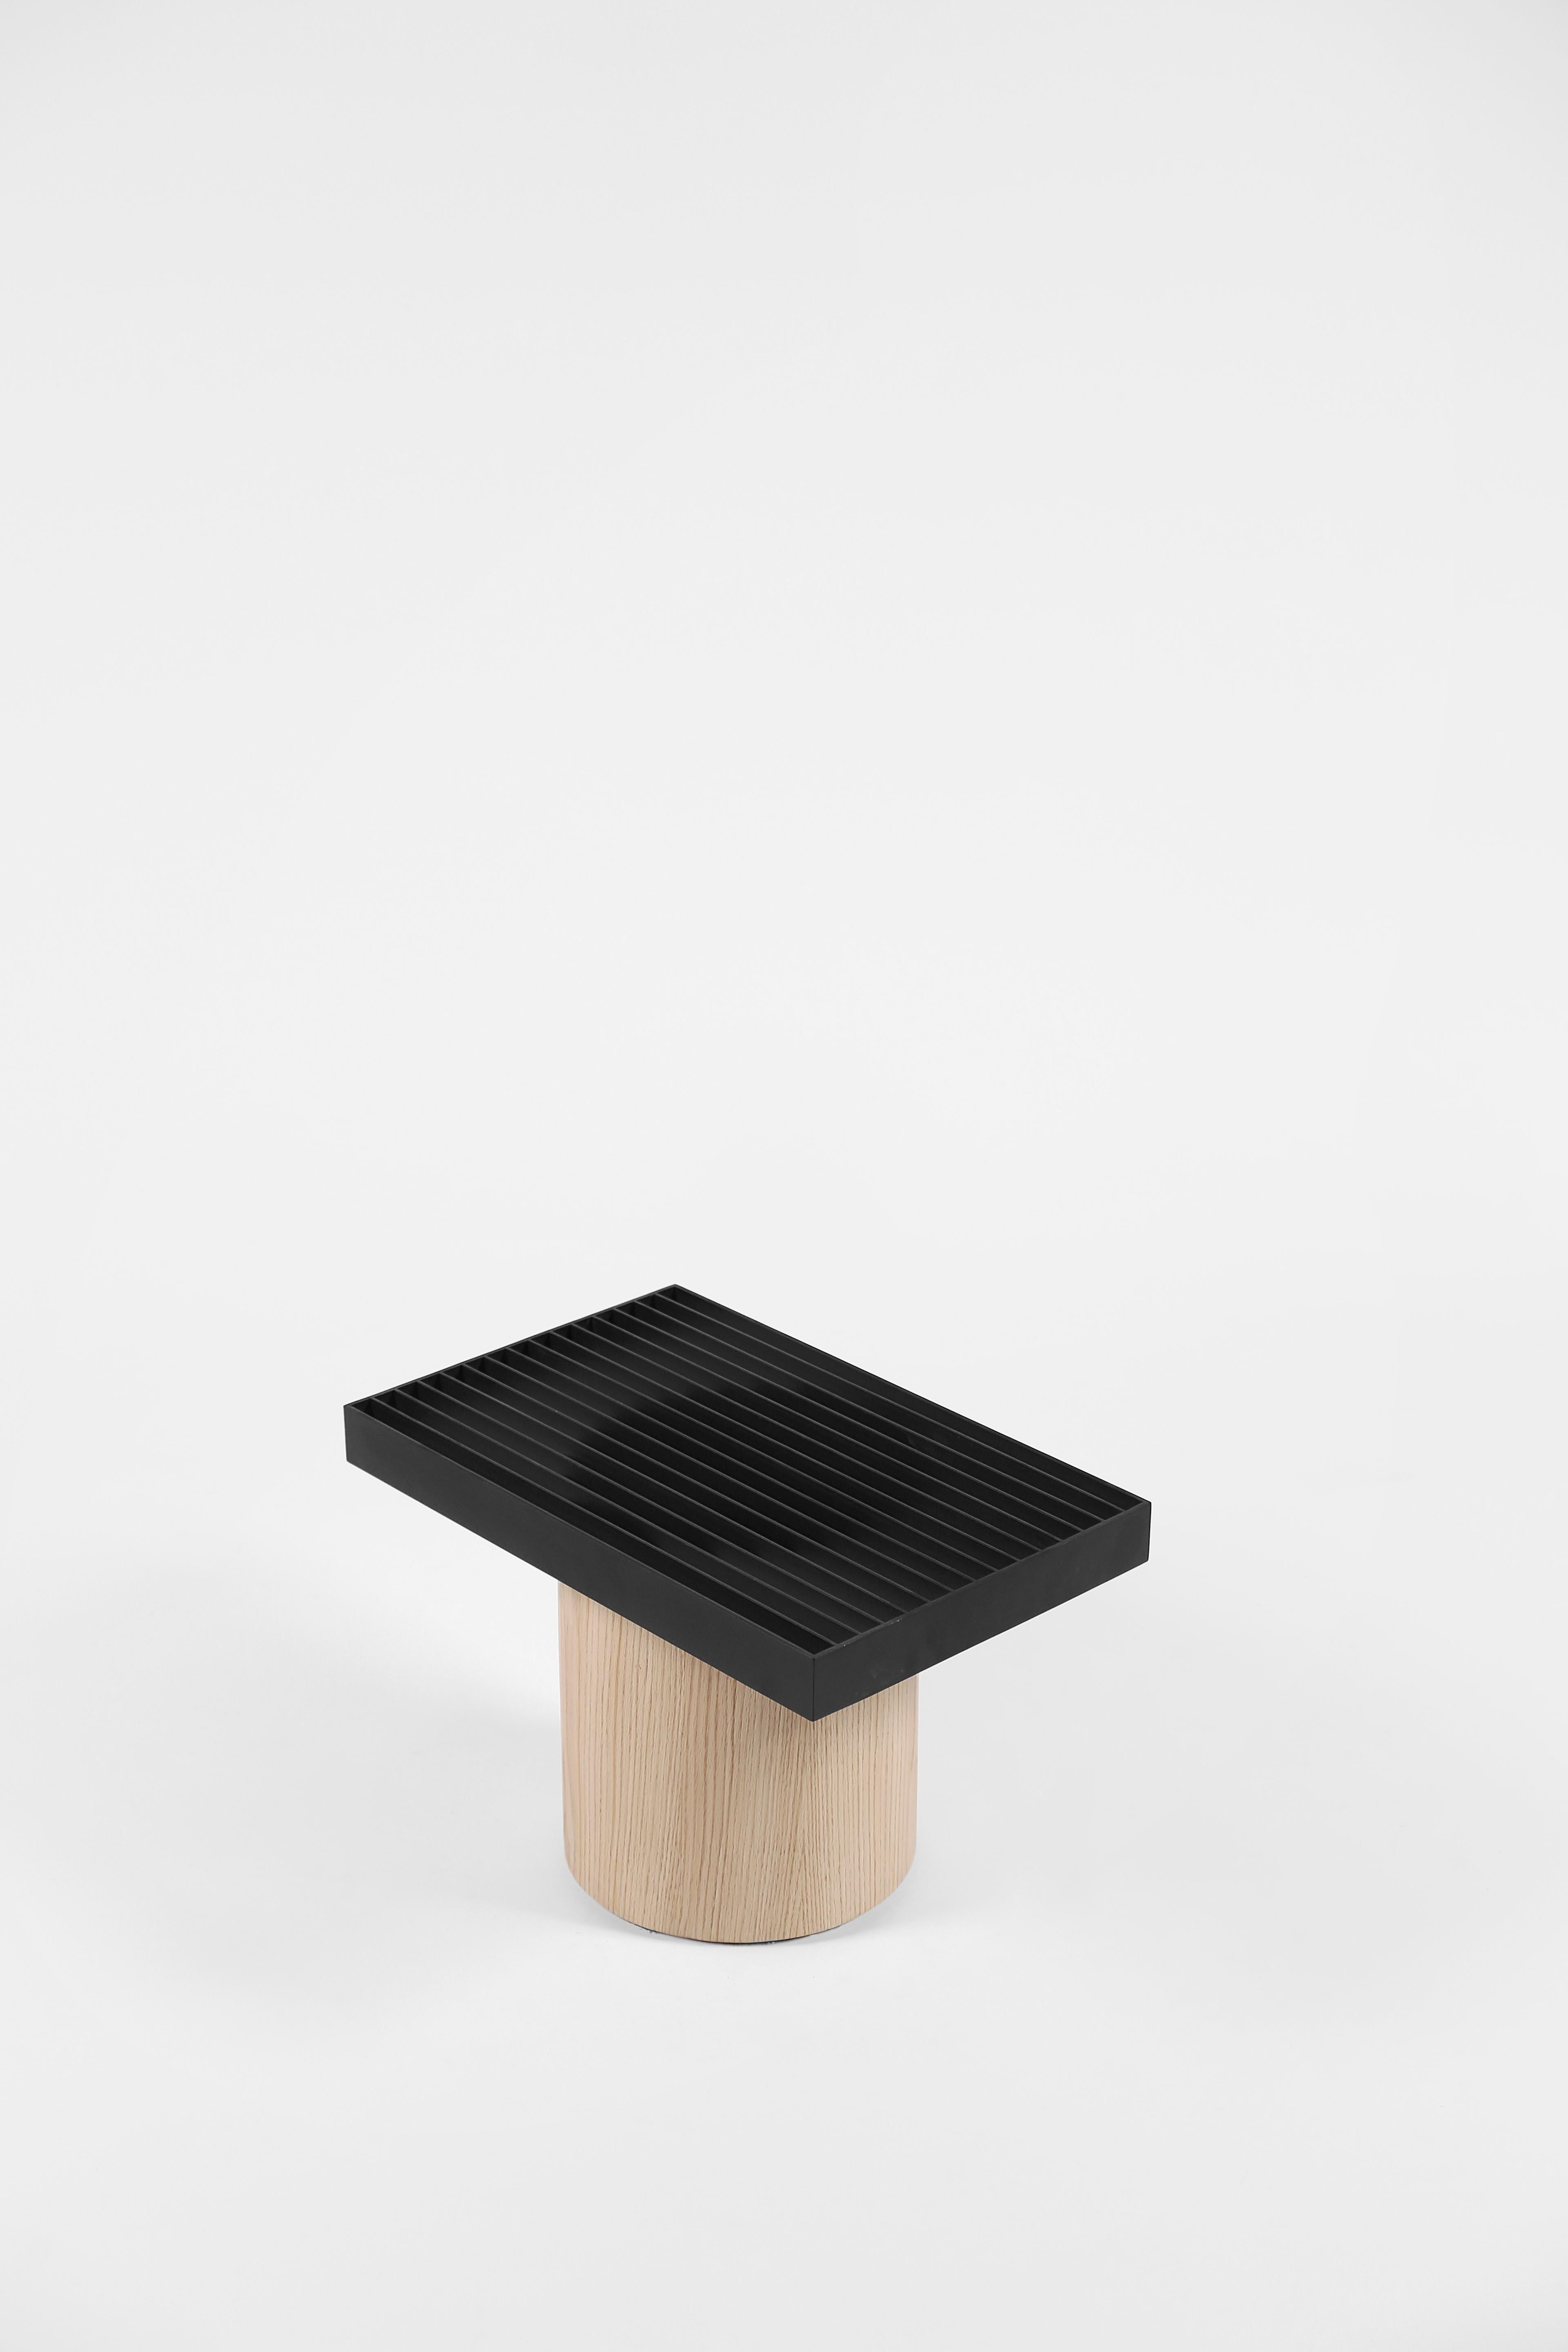 Small Movimiento side table by Joel Escalona
Limited Edition of 9
Dimensions: D 55 x W 35 x H 35 cm
Materials: oak wood, metal.

Natural white oak with metal table.

Joel Escalona
He was born in Mexico City and studied Industrial Design at